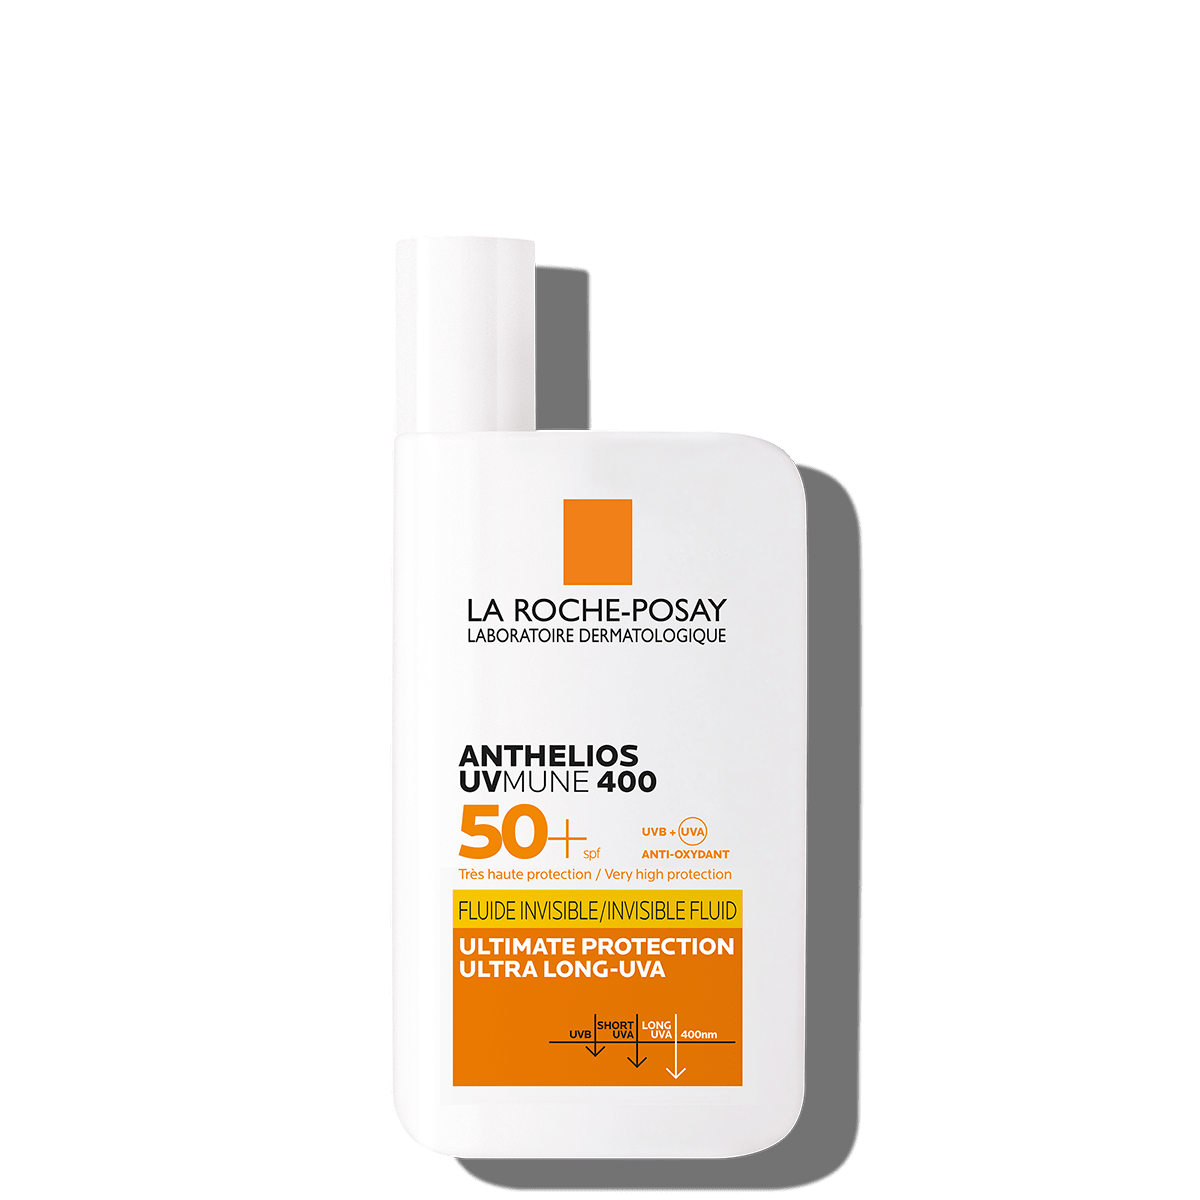 La Roche-Posay Anthelios UVA/UVB Fluid SPF 50+ (front view).